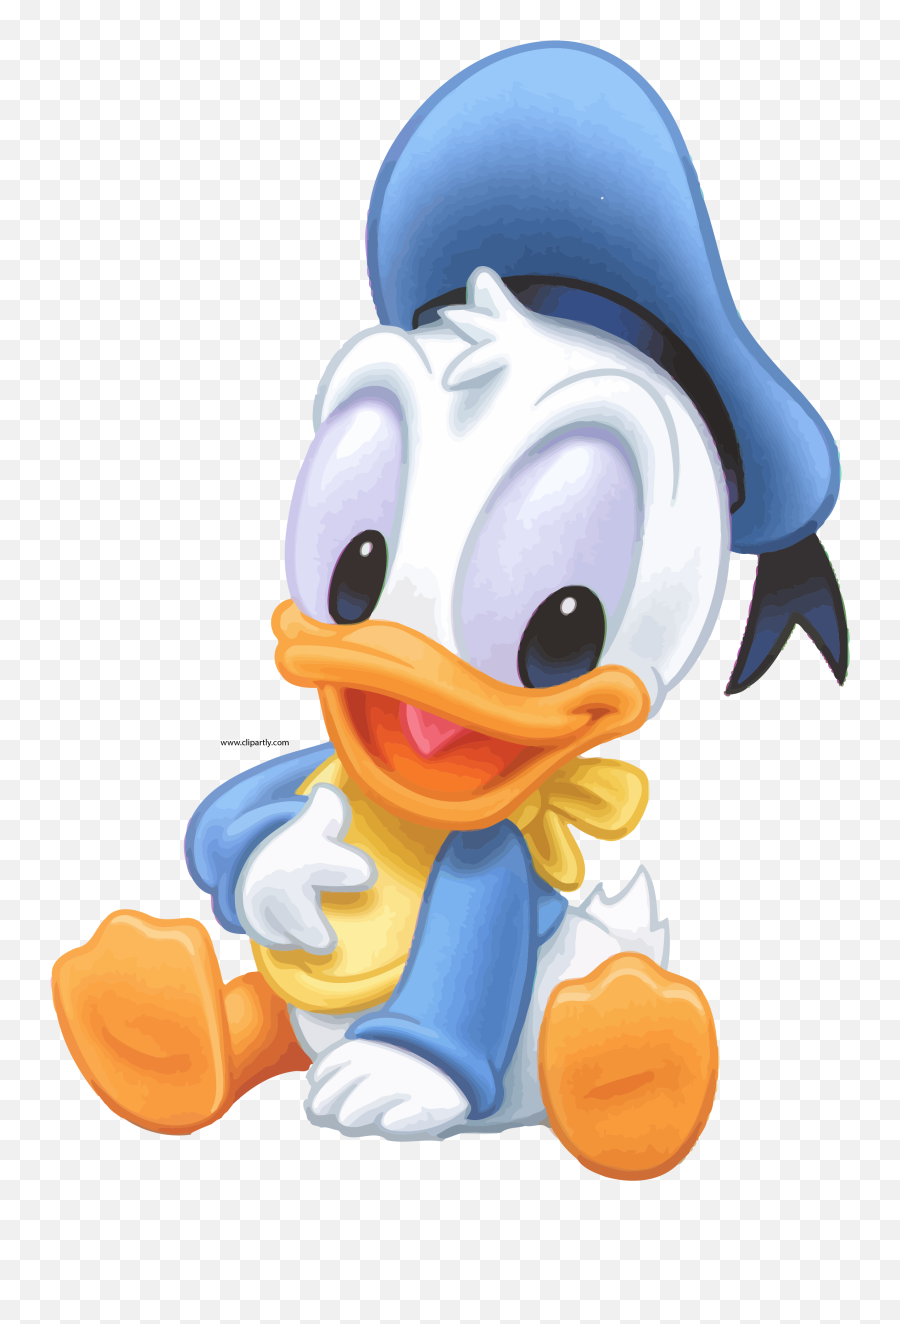 Baby Donald Duck Png 6 Image